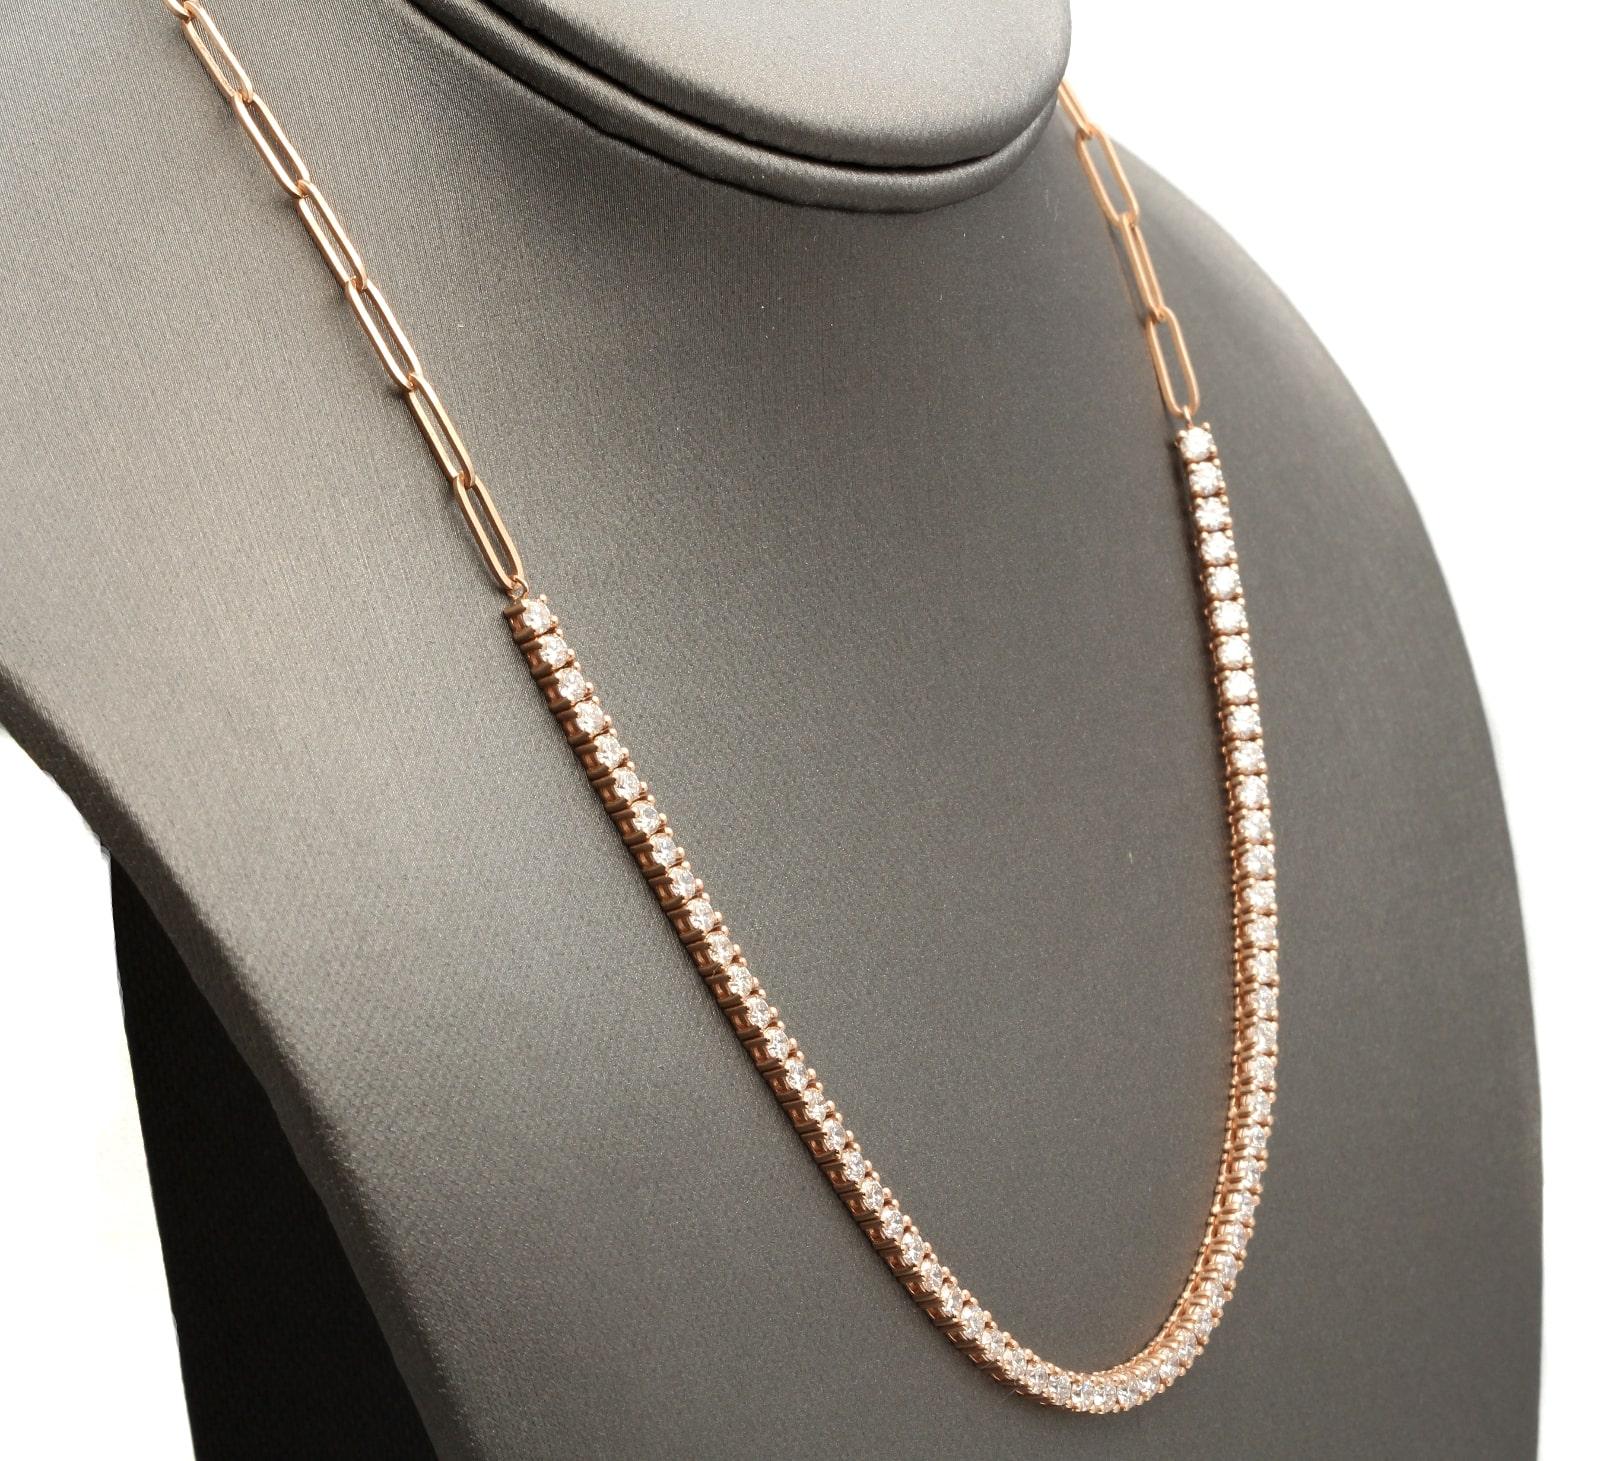 Gorgeous 5.00Ct Natural Diamond 14k Solid Rose Gold Tennis Paper Clip Style Necklace

Amazing looking piece! 

Stamped: 14k

Total Natural Round Diamond Weight is: Approx. 5.00 Carats (61pcs.) (G-H / SI1-SI2) 

Chain Length is: Approx. 17 inches